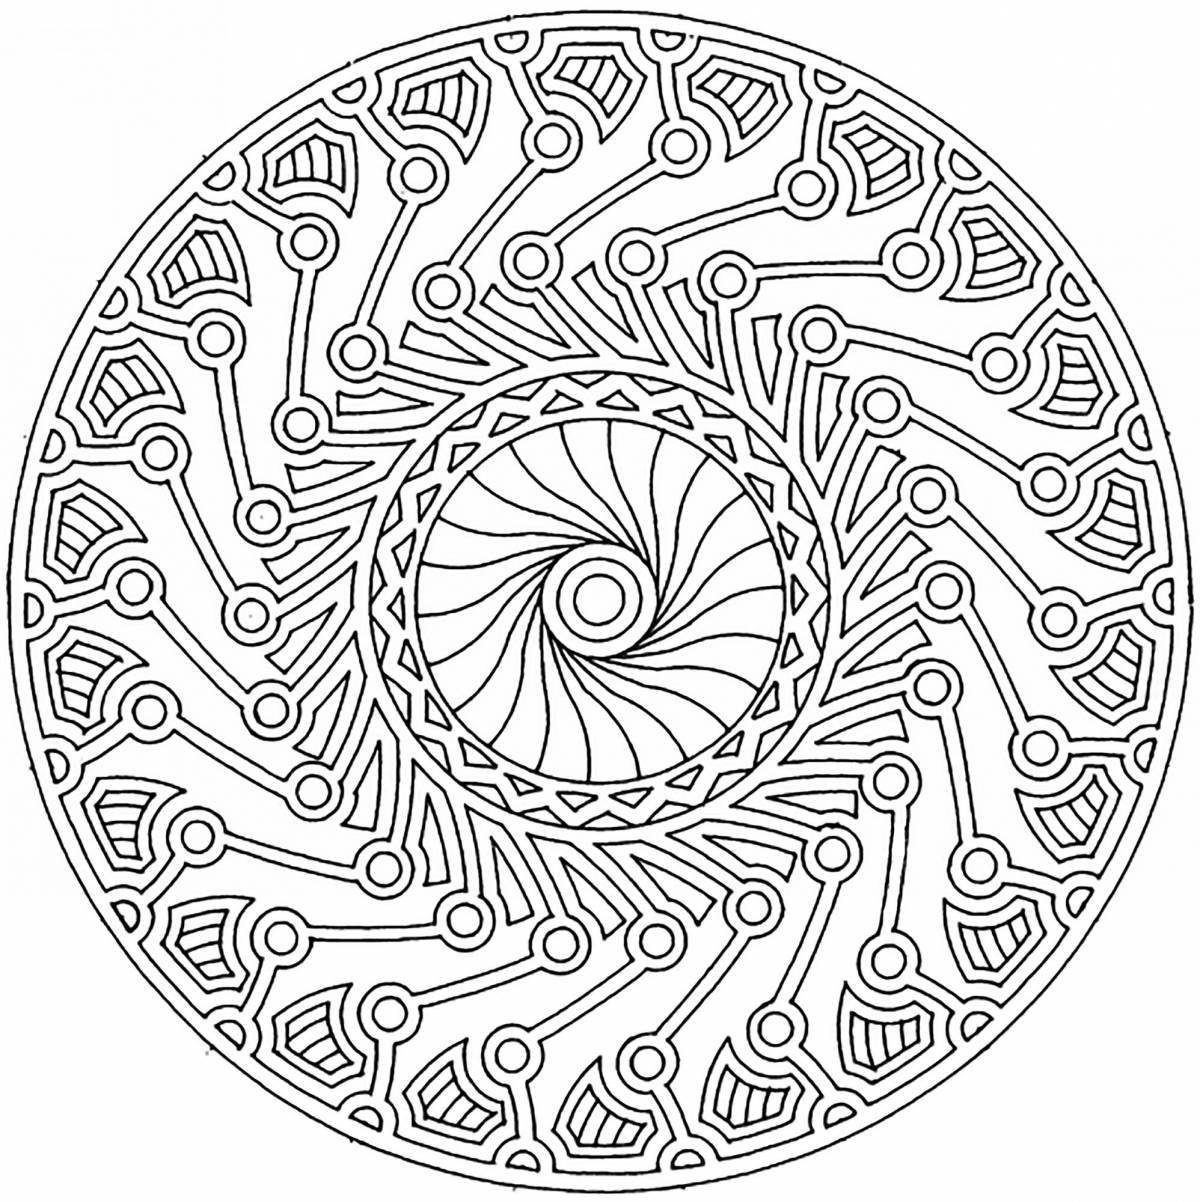 Coloring page hypnotic anti-stress spirals